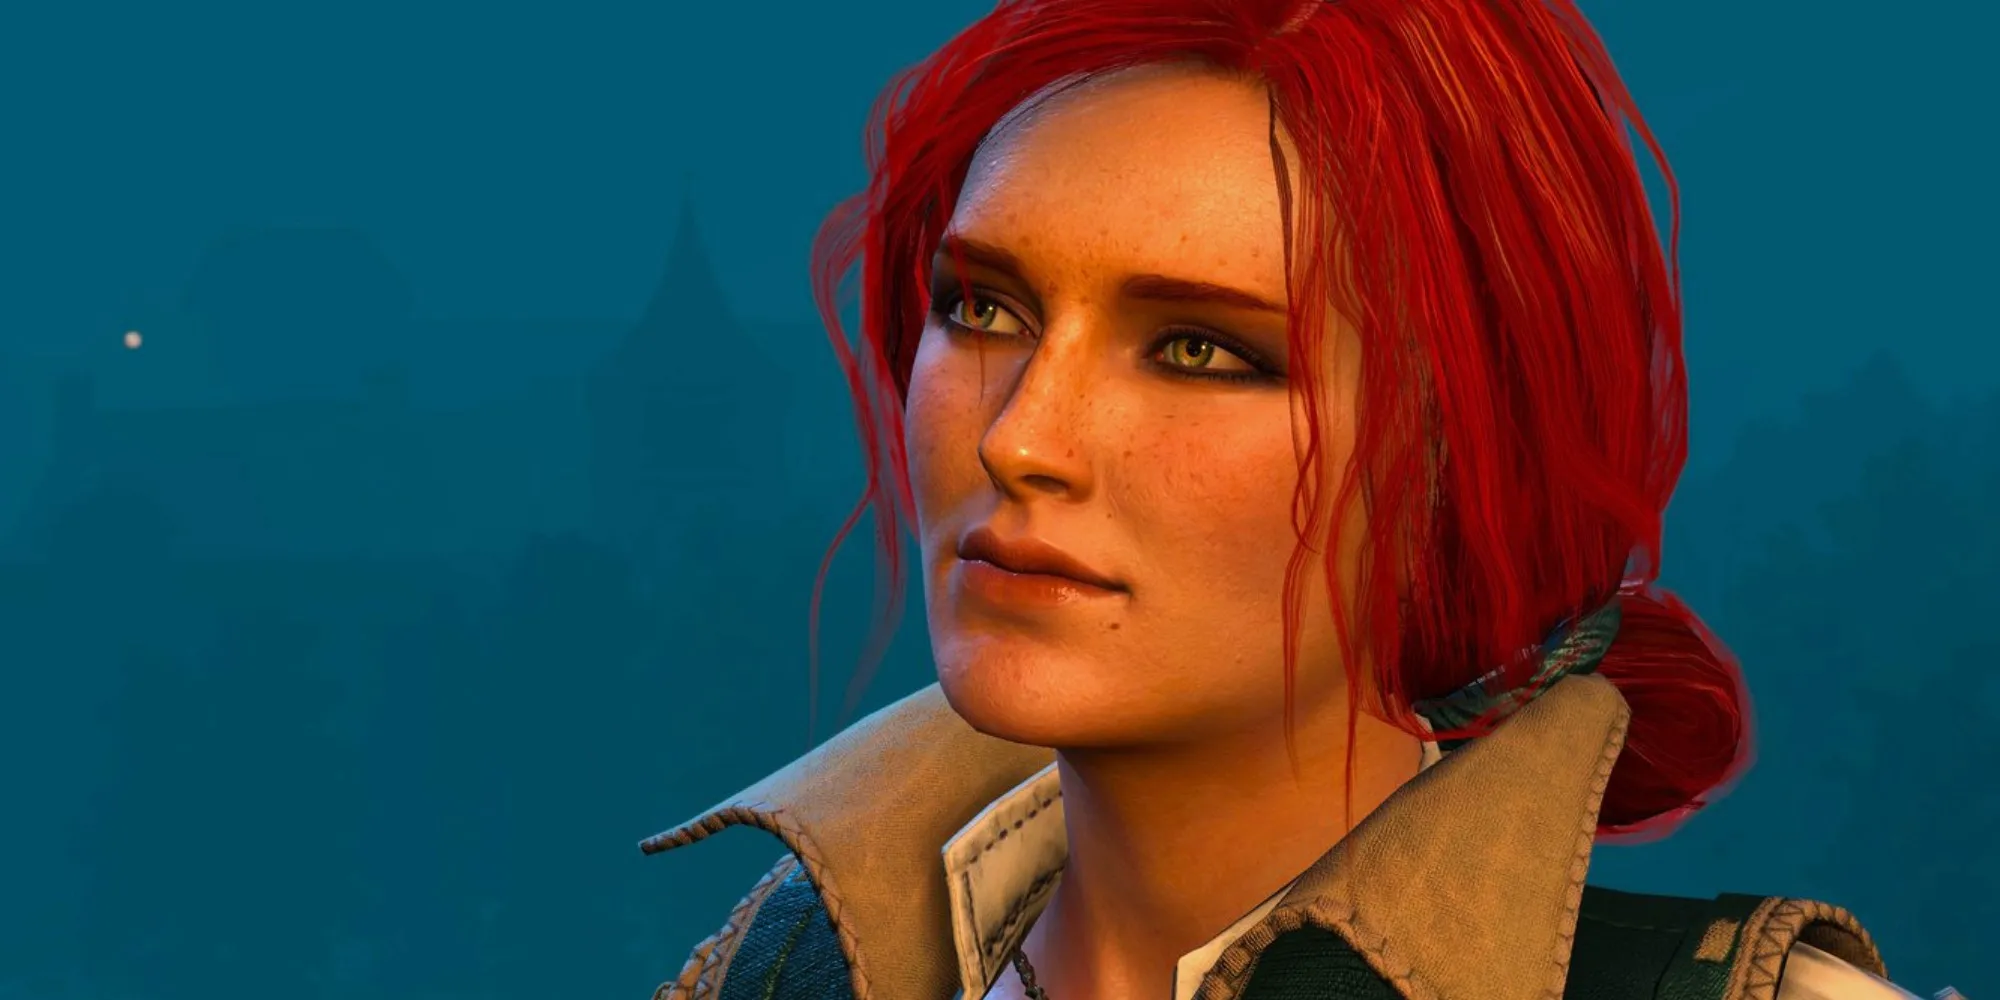 Triss Merigold in The Witcher 3